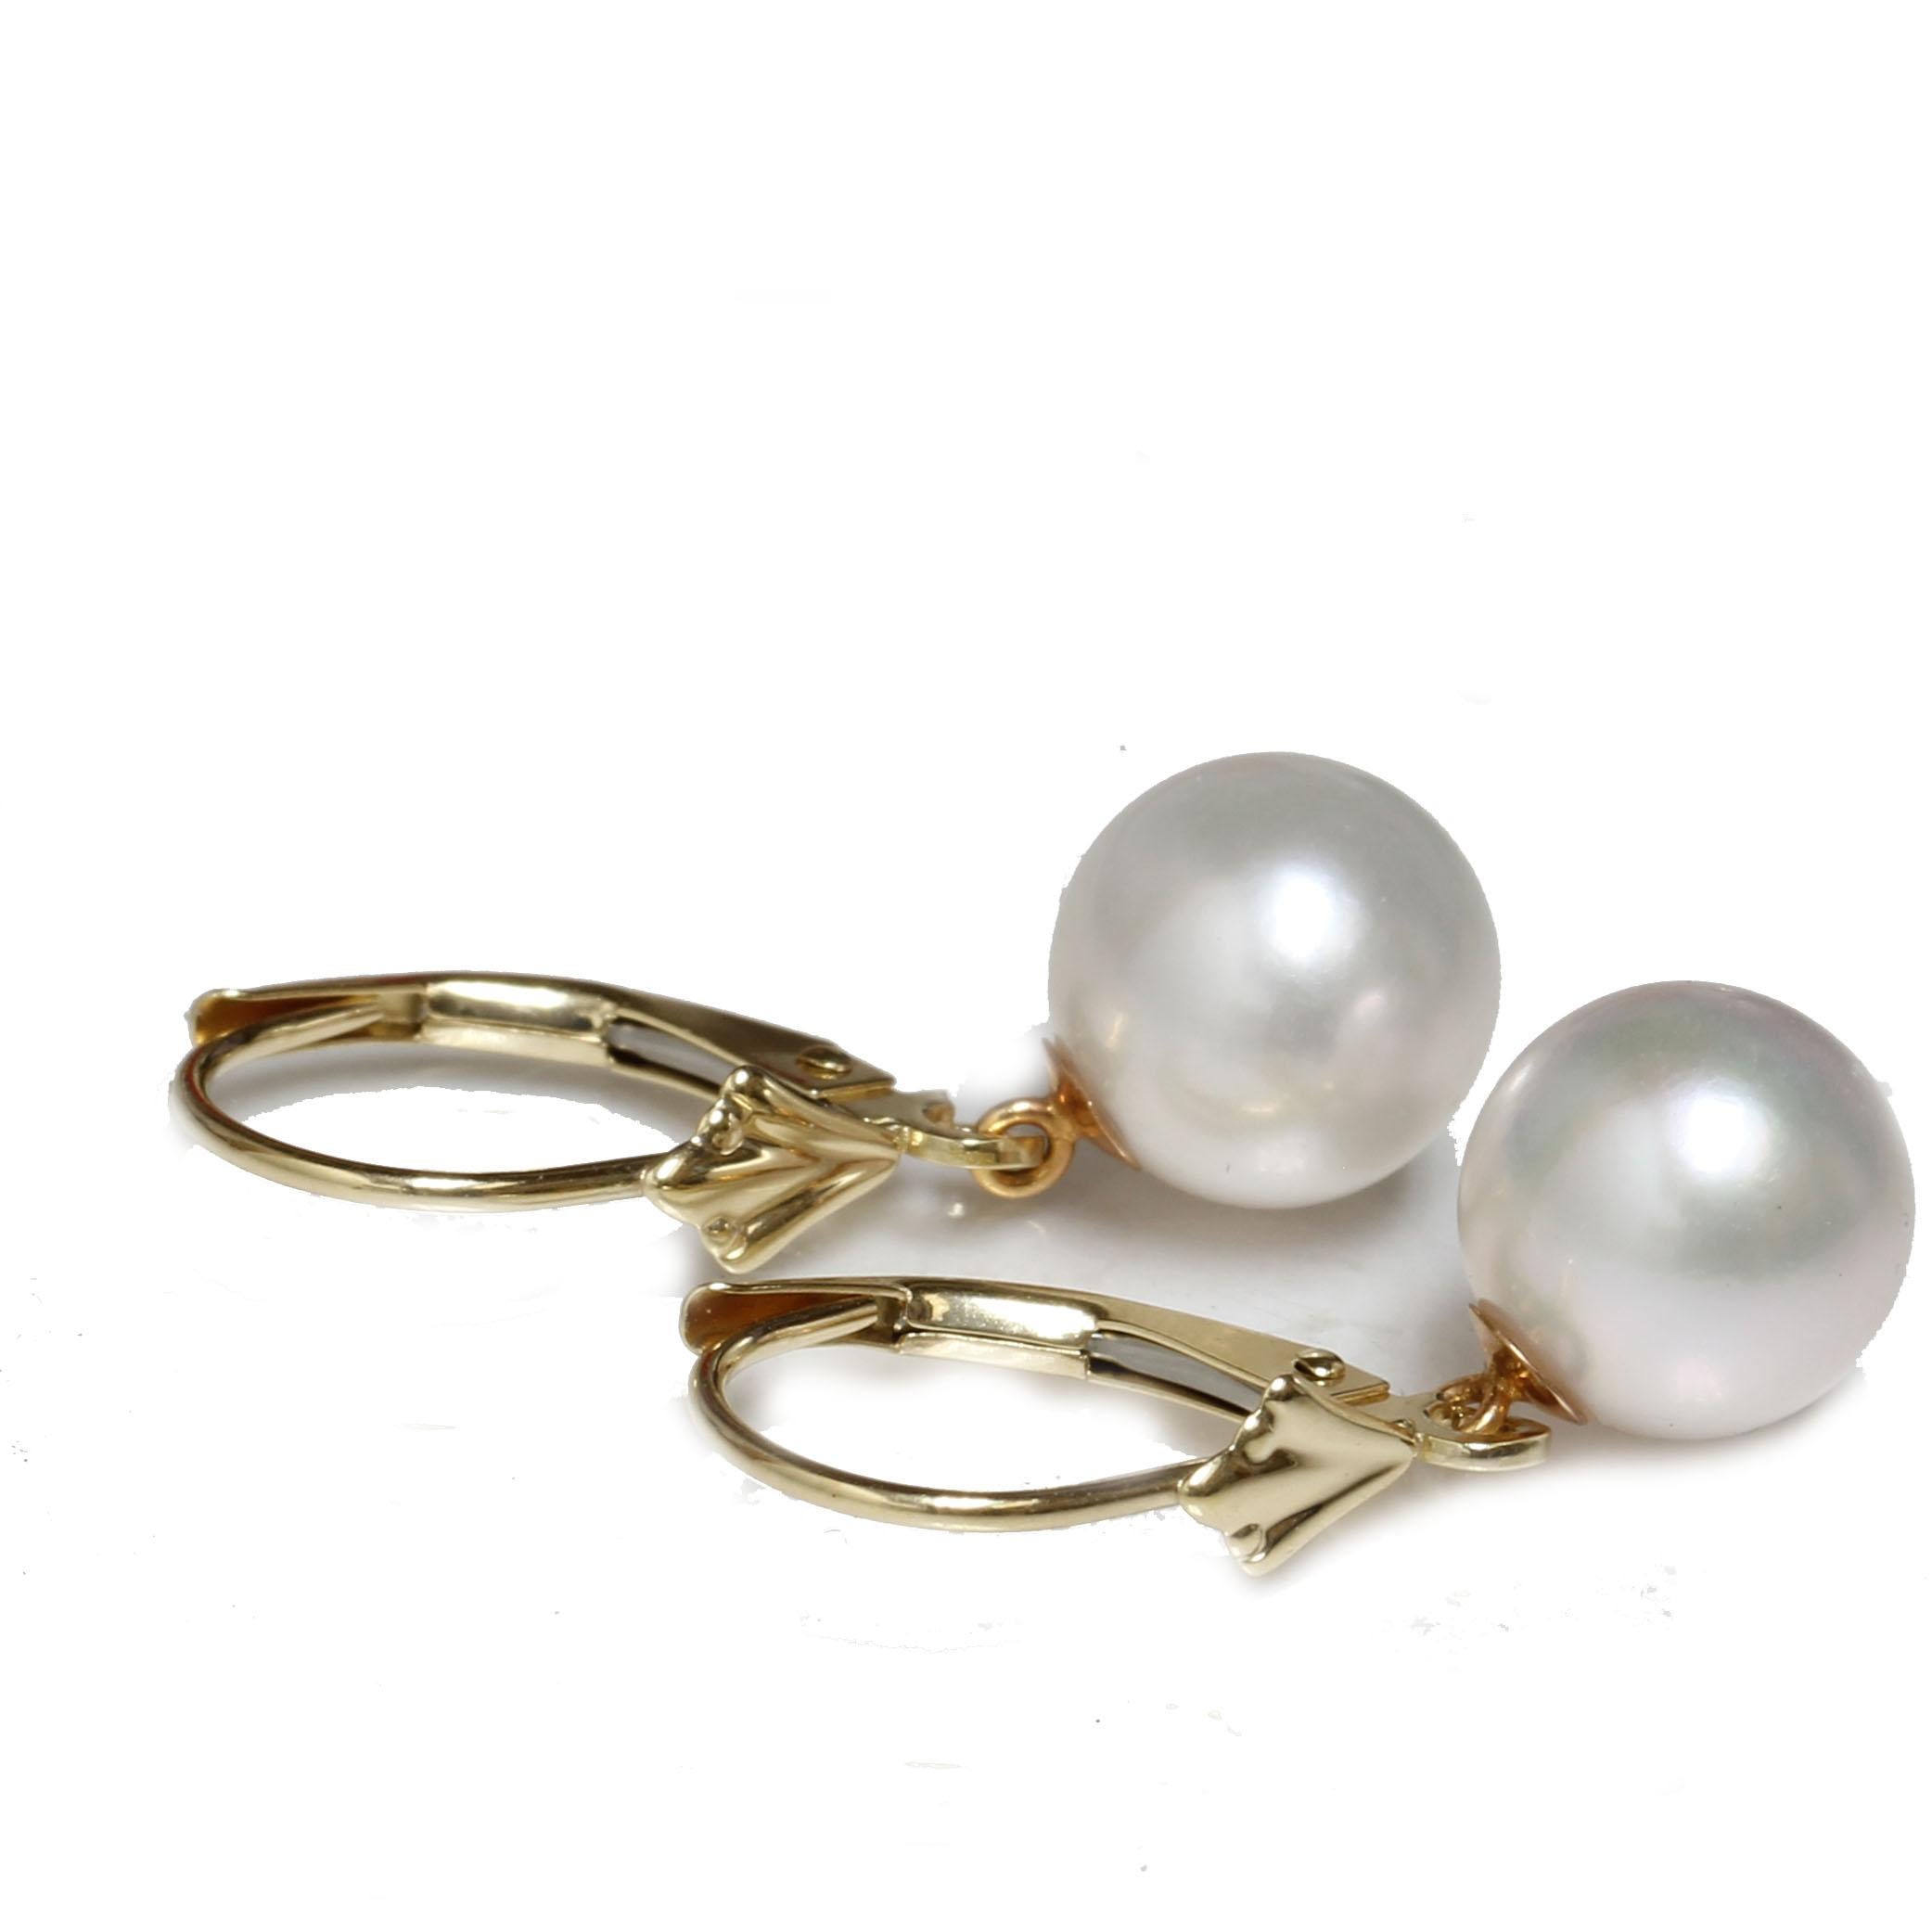 8.5 - 9mm AAA Flawless Japanese akoya cultured round white pearl fleur des lis lever-backs earrings. This pearl dangle earrings are set in 14k yellow gold. Fleur-de-lis earrings are popular choices for people who appreciate classic and elegant